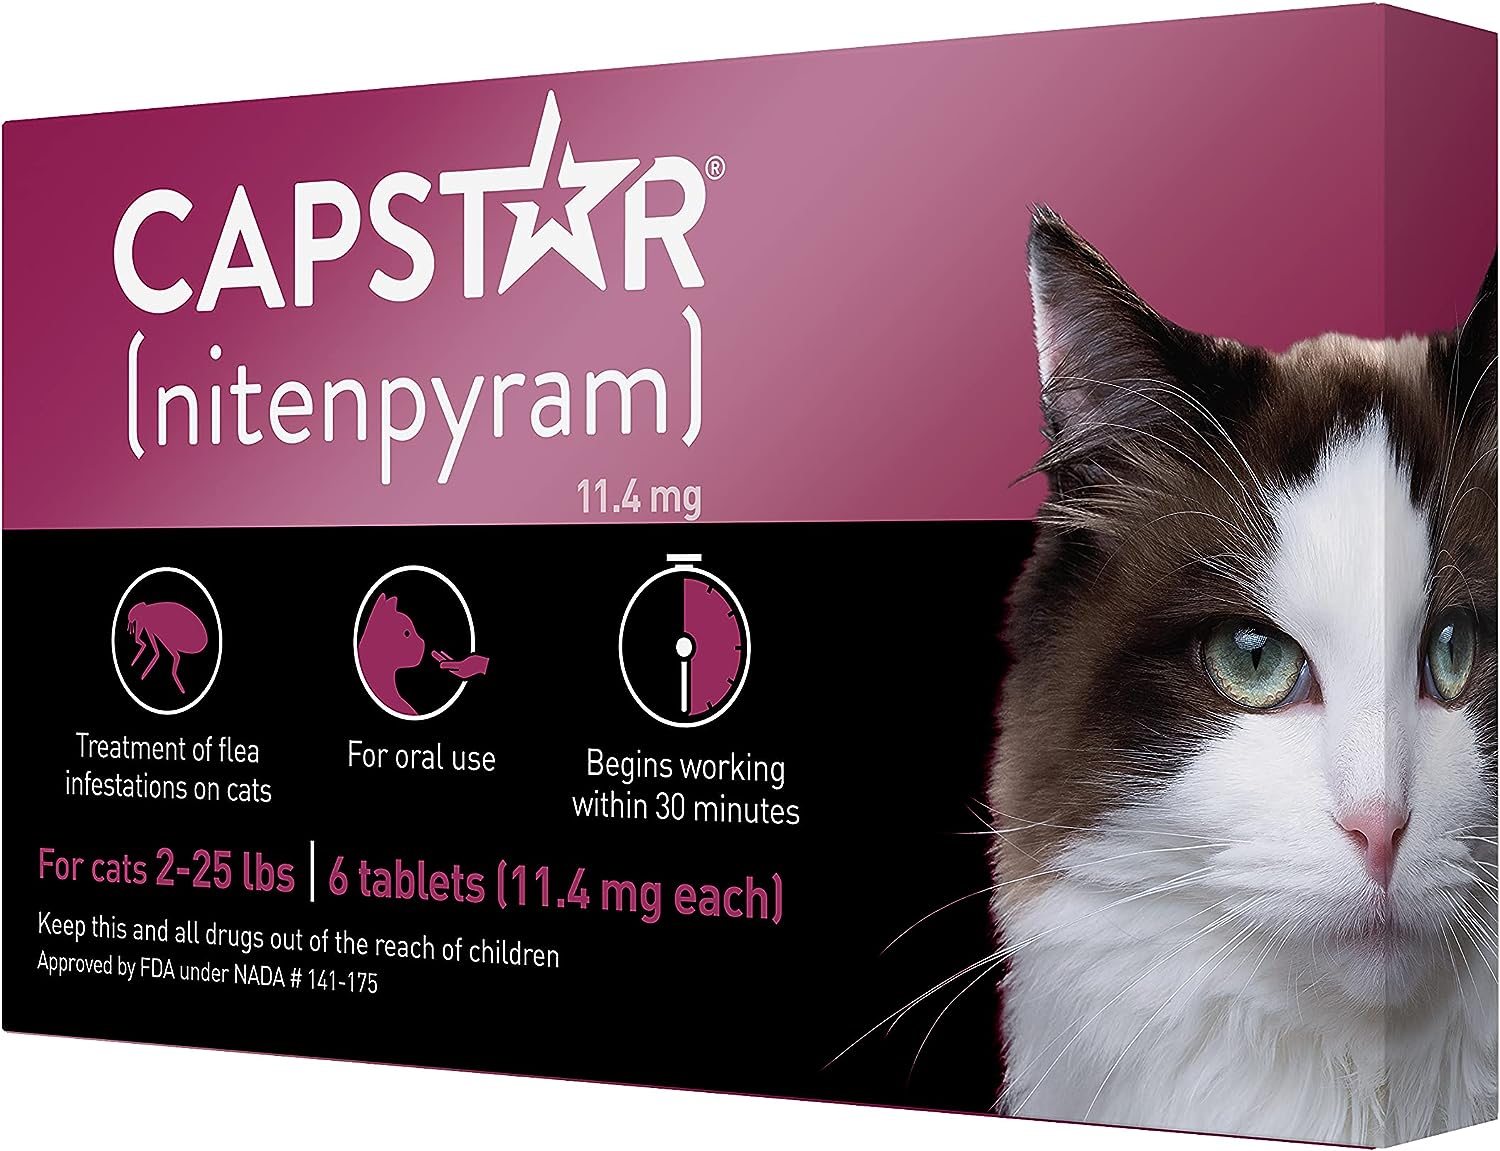 $20.47 w/ S&S: Capstar (nitenpyram) for Cats, Fast-Acting Oral Flea Treatment for Cats 2-25 lbs, 6 Doses